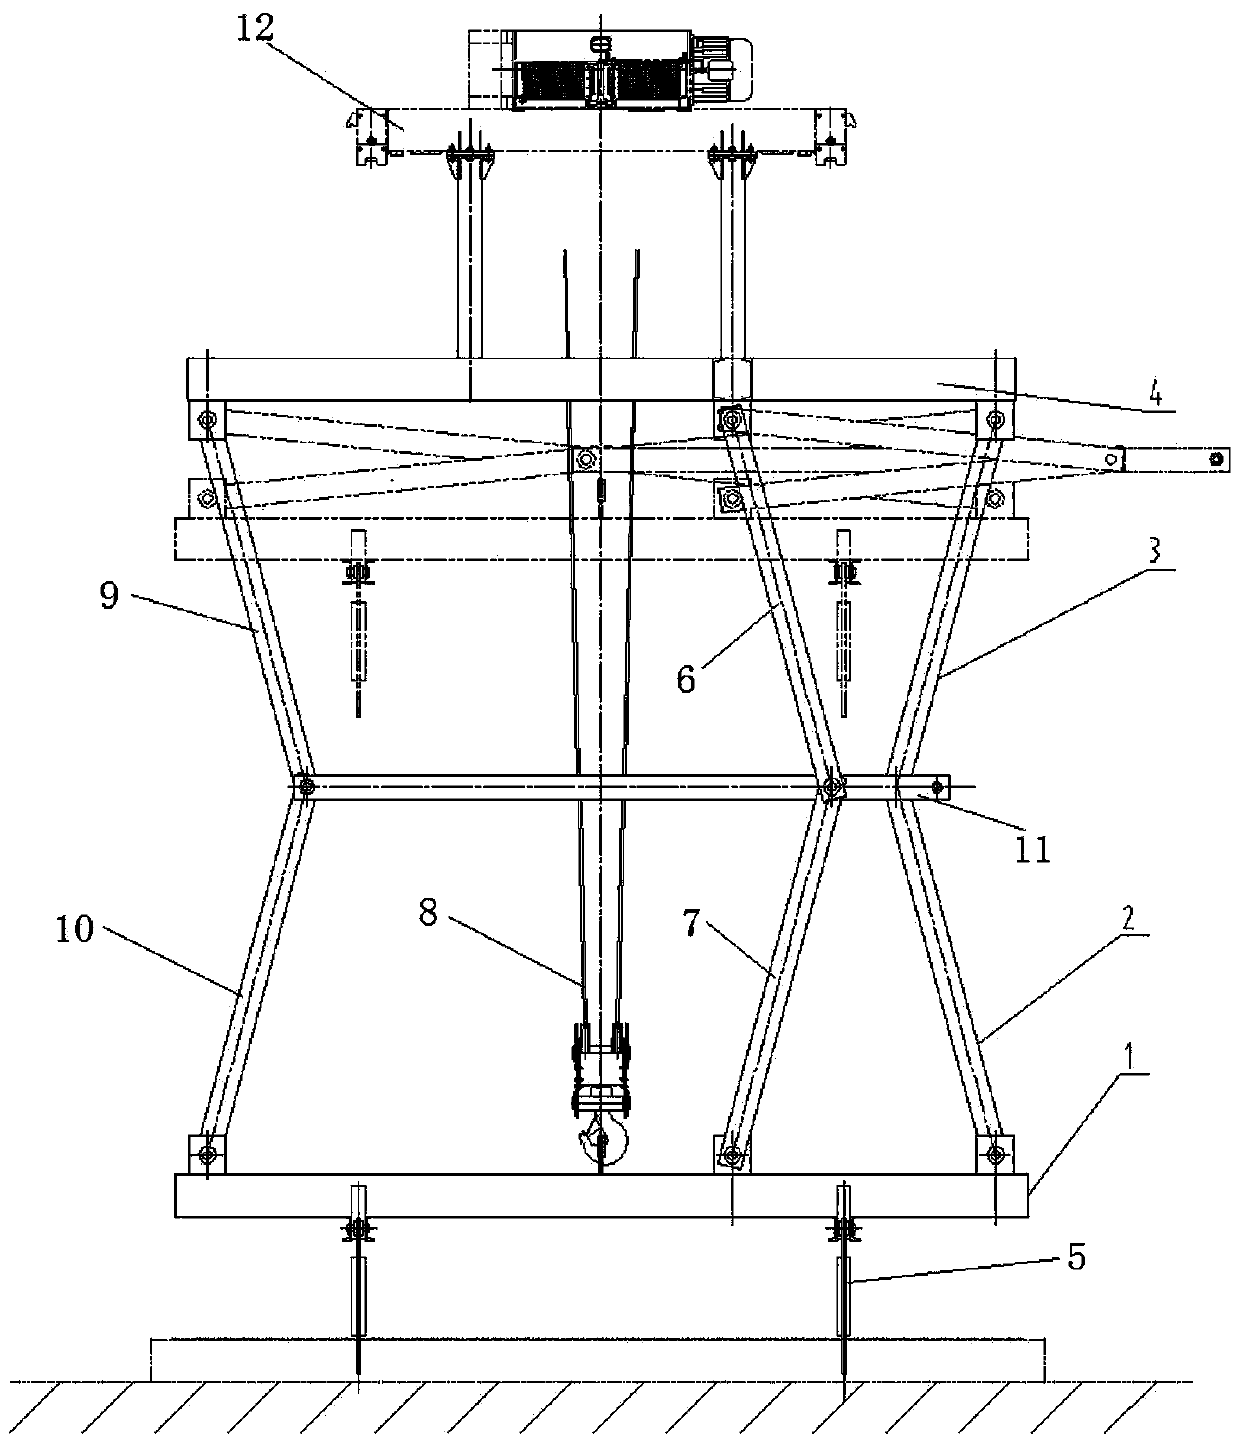 Hanger and lifting device using hanger